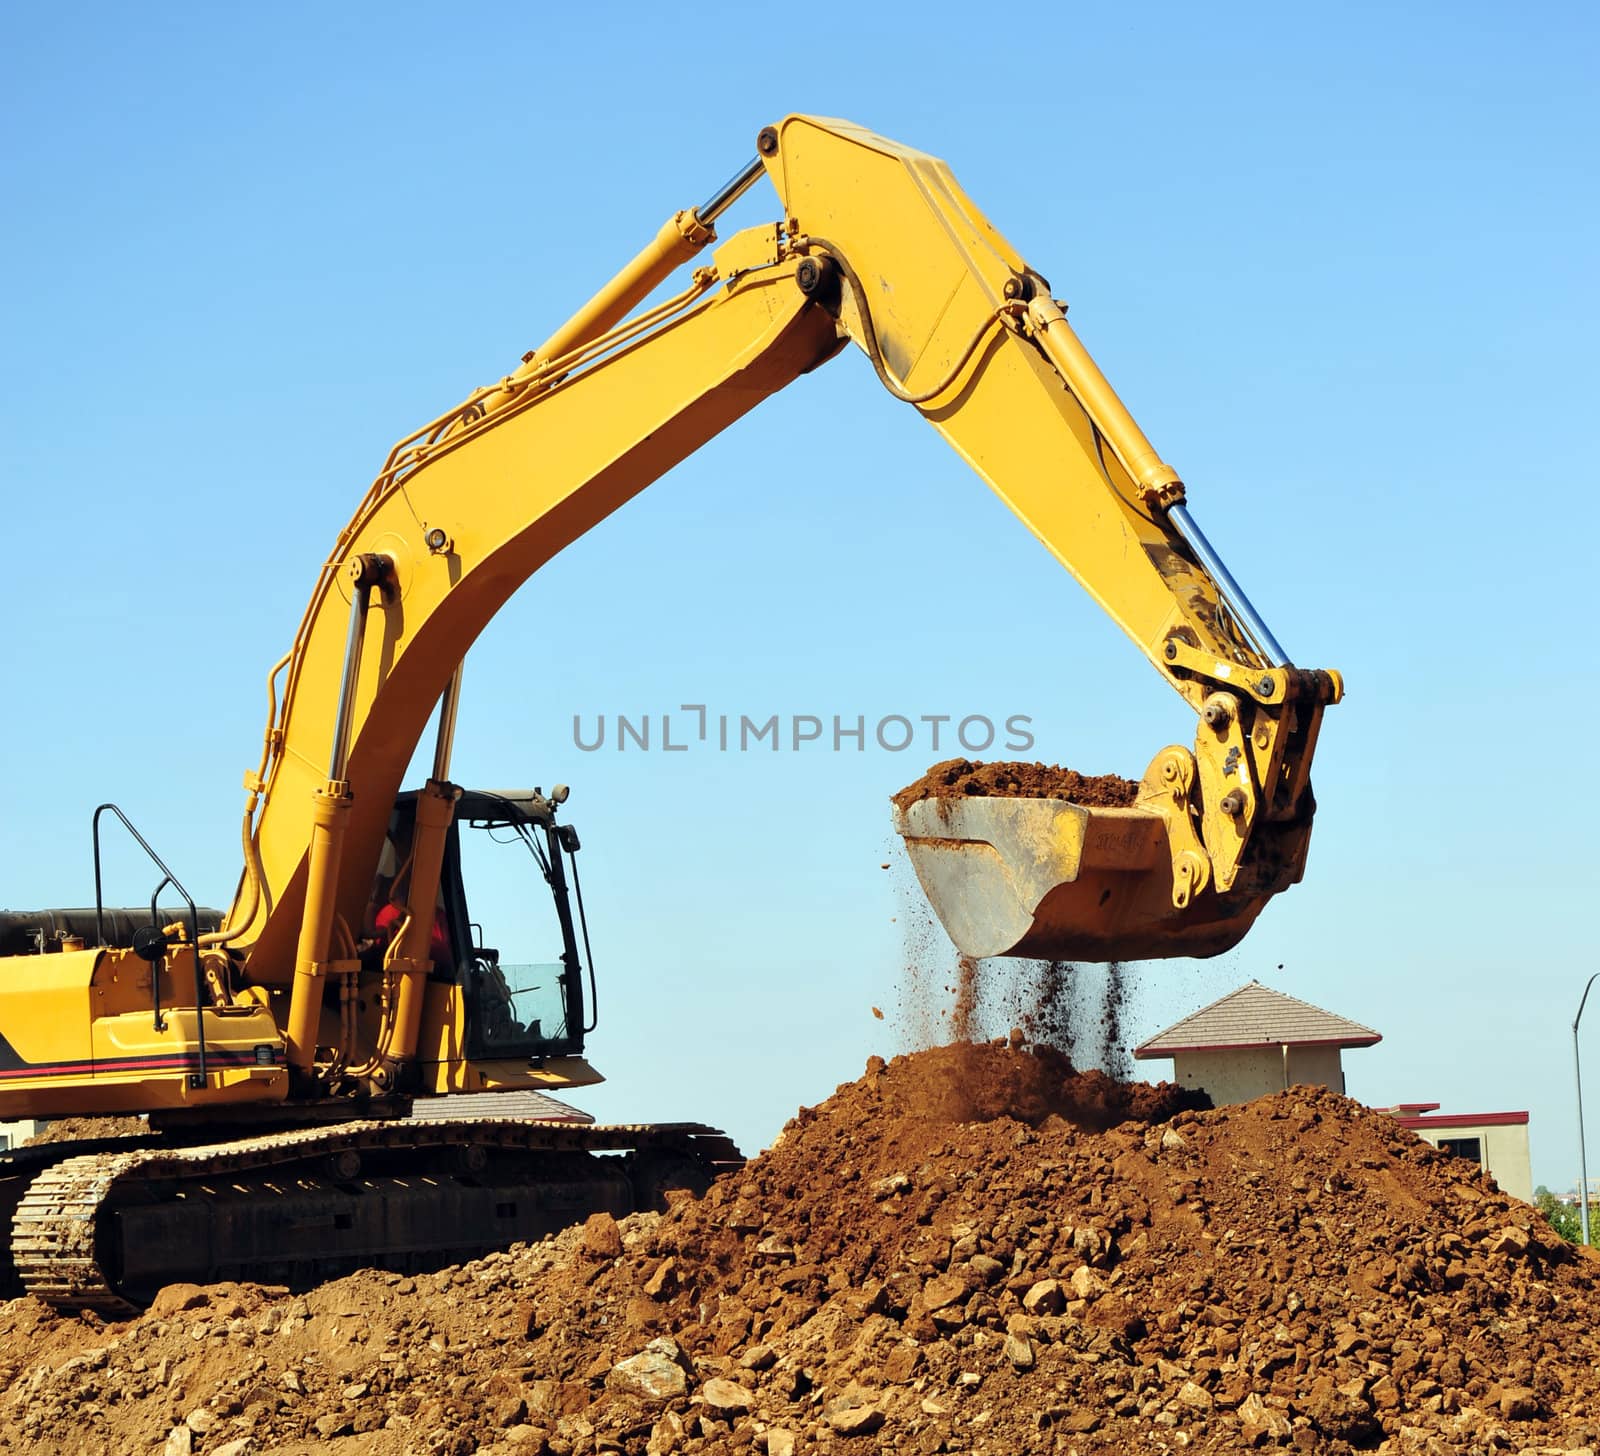 A large yellow excavator moving a large pile of dirt with debris falling from the bucket.